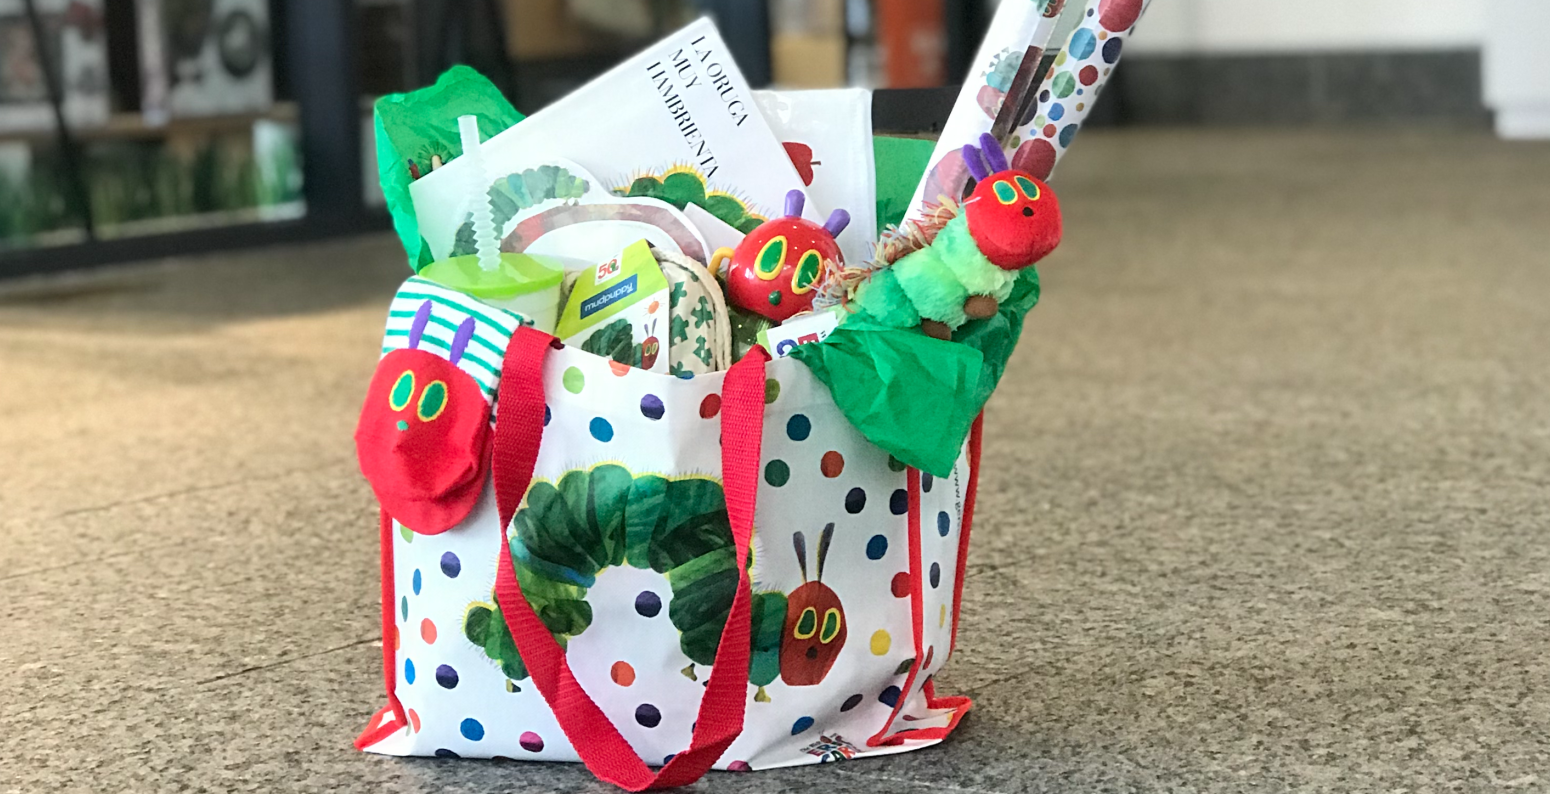 A Very Hungry Caterpillar tote bag filled with Caterpillar products is set on the floor in front of the museum shop.